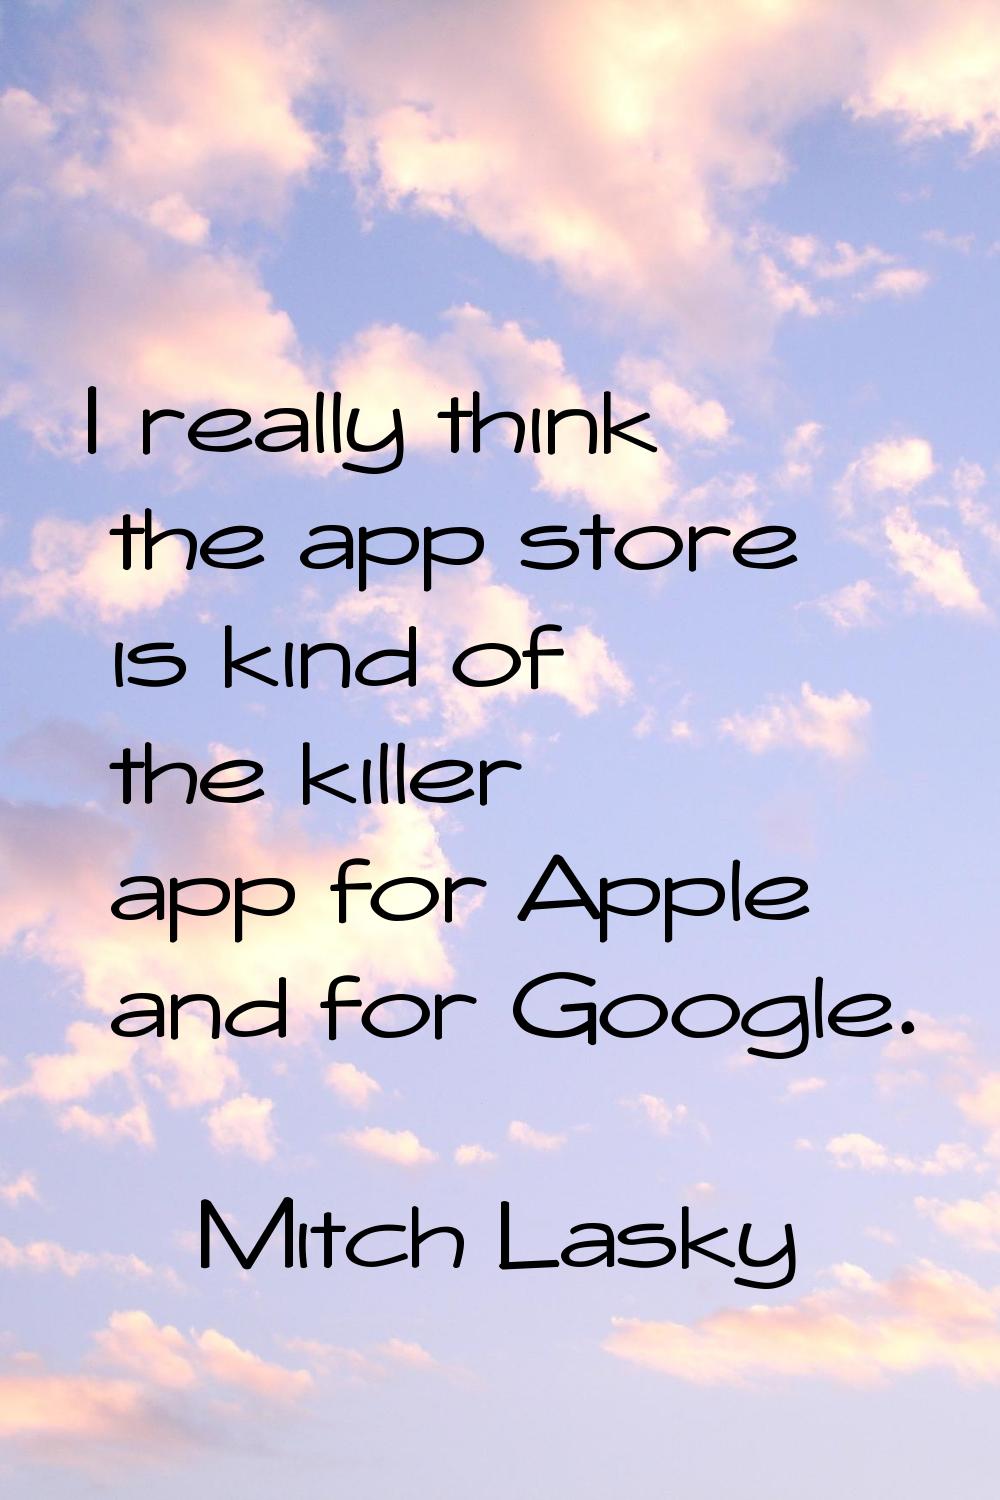 I really think the app store is kind of the killer app for Apple and for Google.